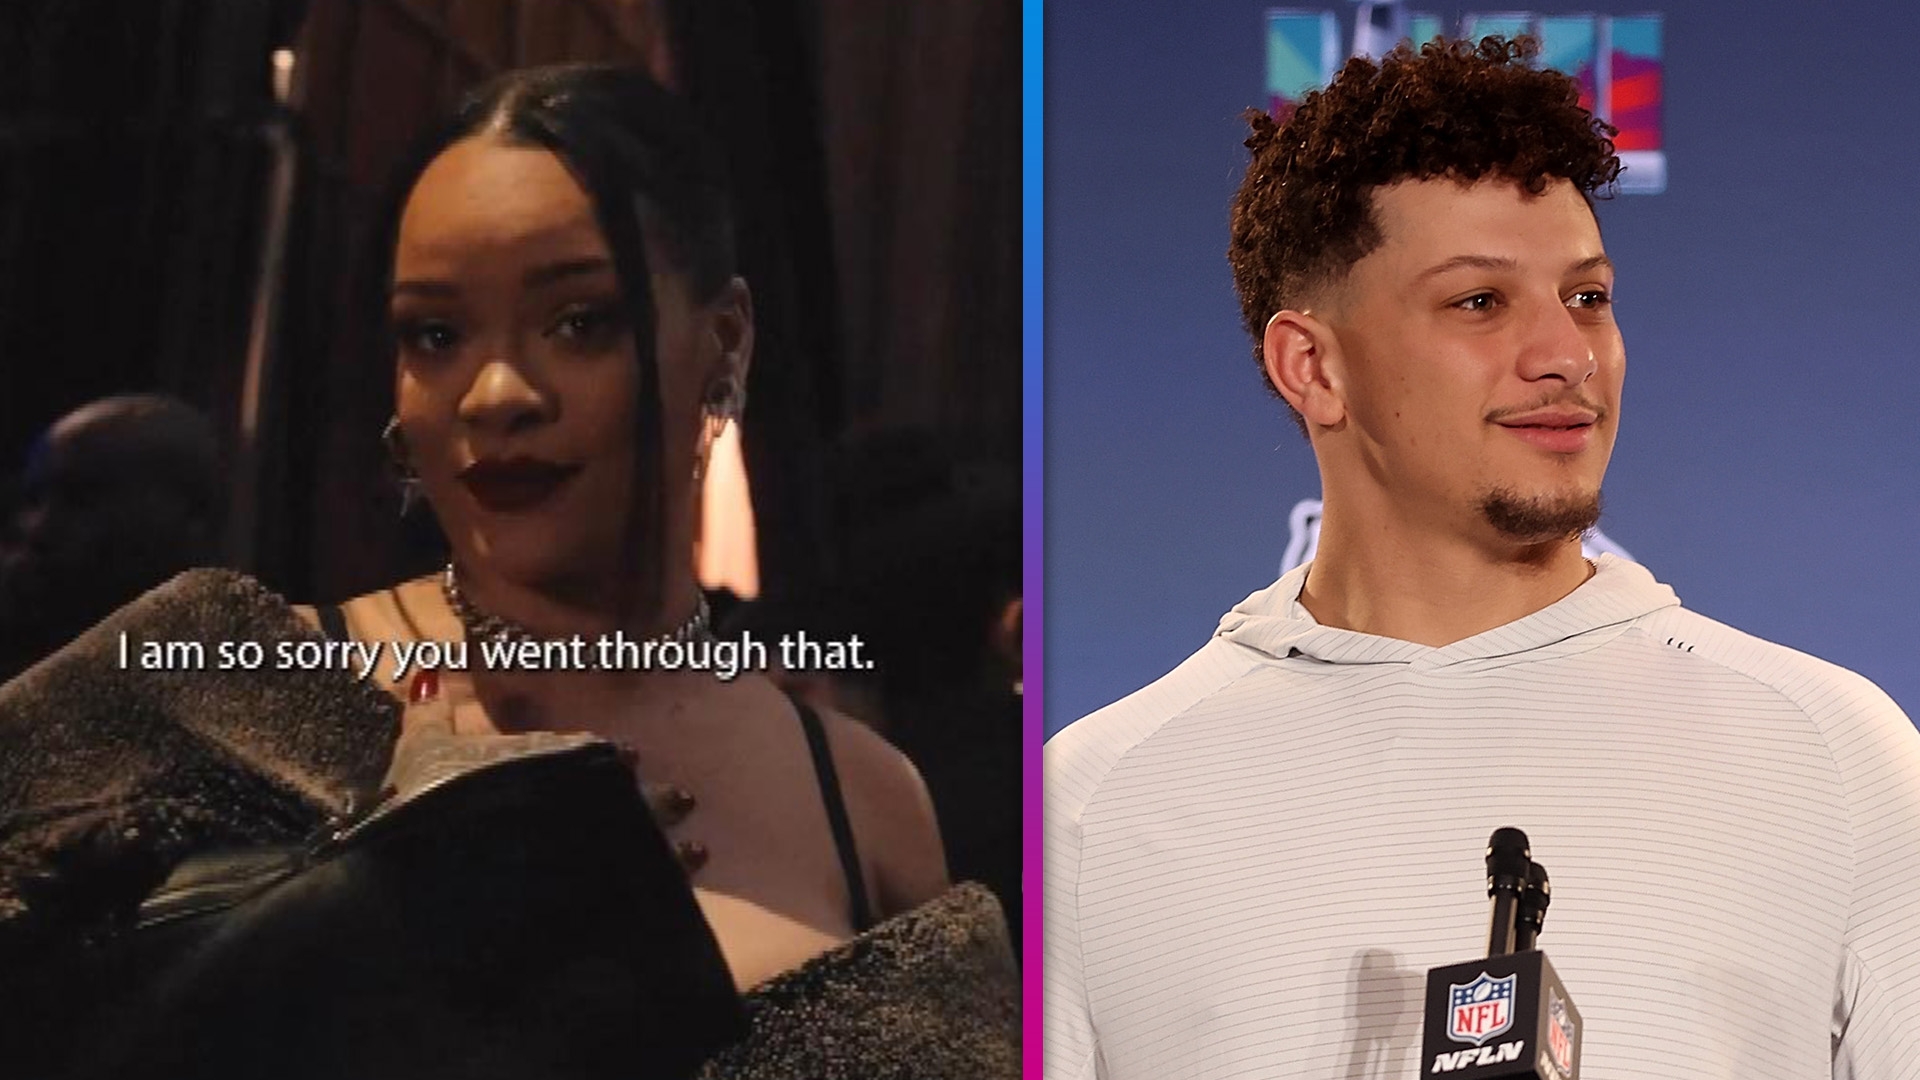 Patrick Mahomes' Daughter Sterling Gets Chanel Purse for Her